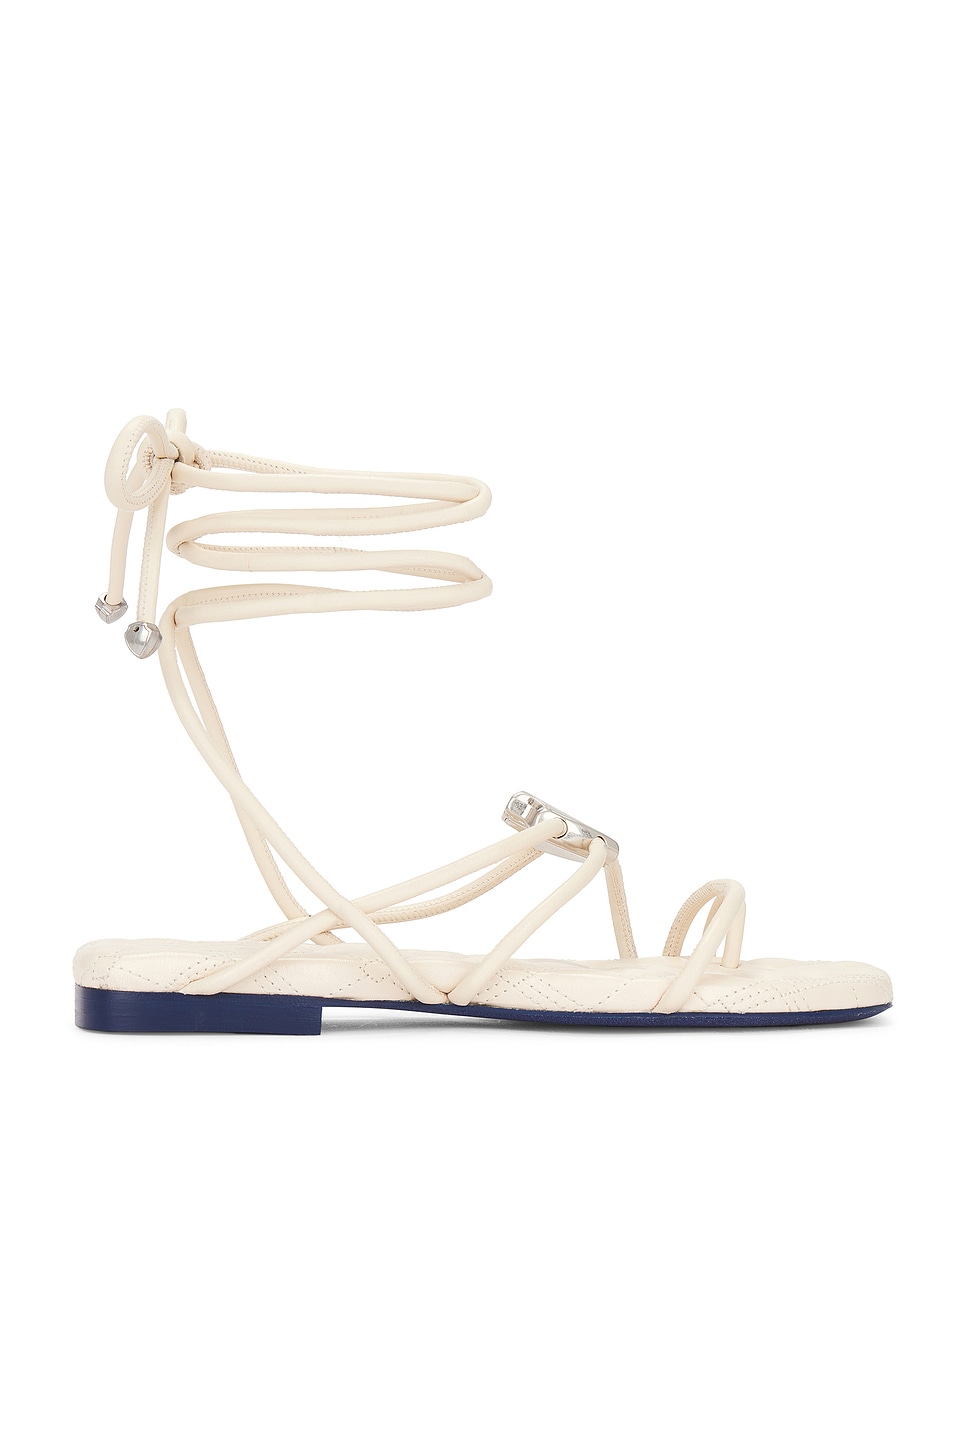 Image 1 of Burberry Ivy Shield Sandal in Soap